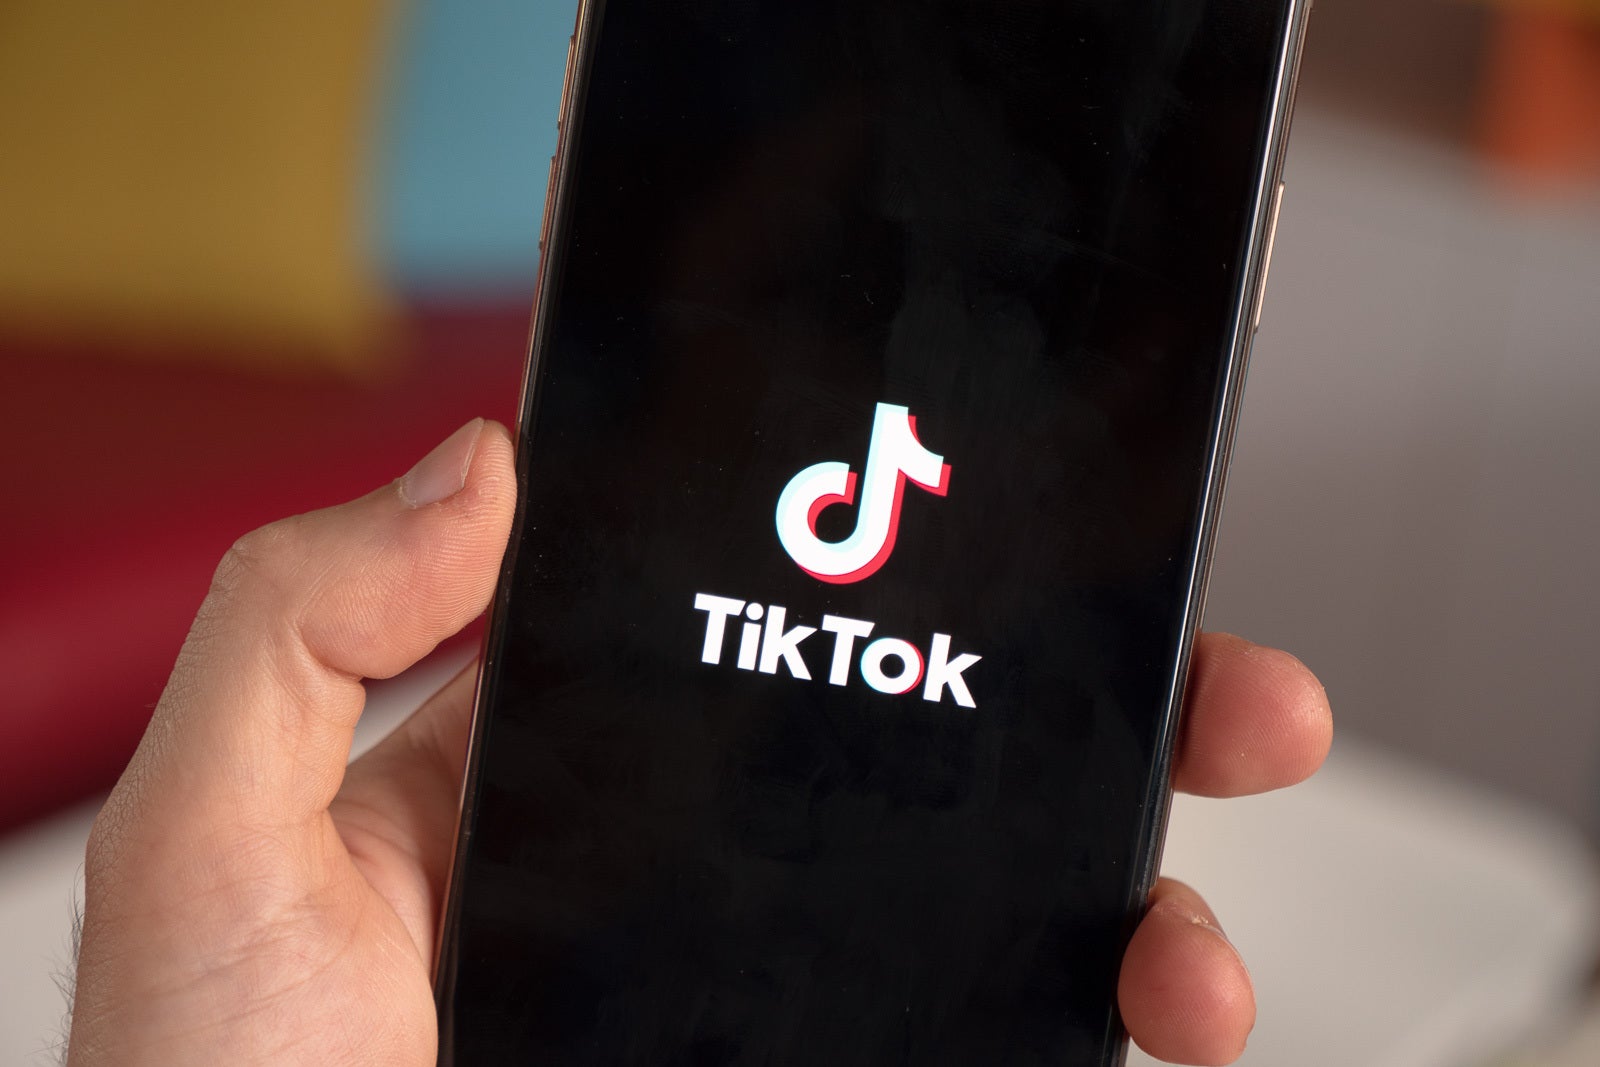 TikTok has over a billion downloads on GooglePlay alone. - TikTok incorporates Research API in order to provide transparency for state and nonprofit researchers